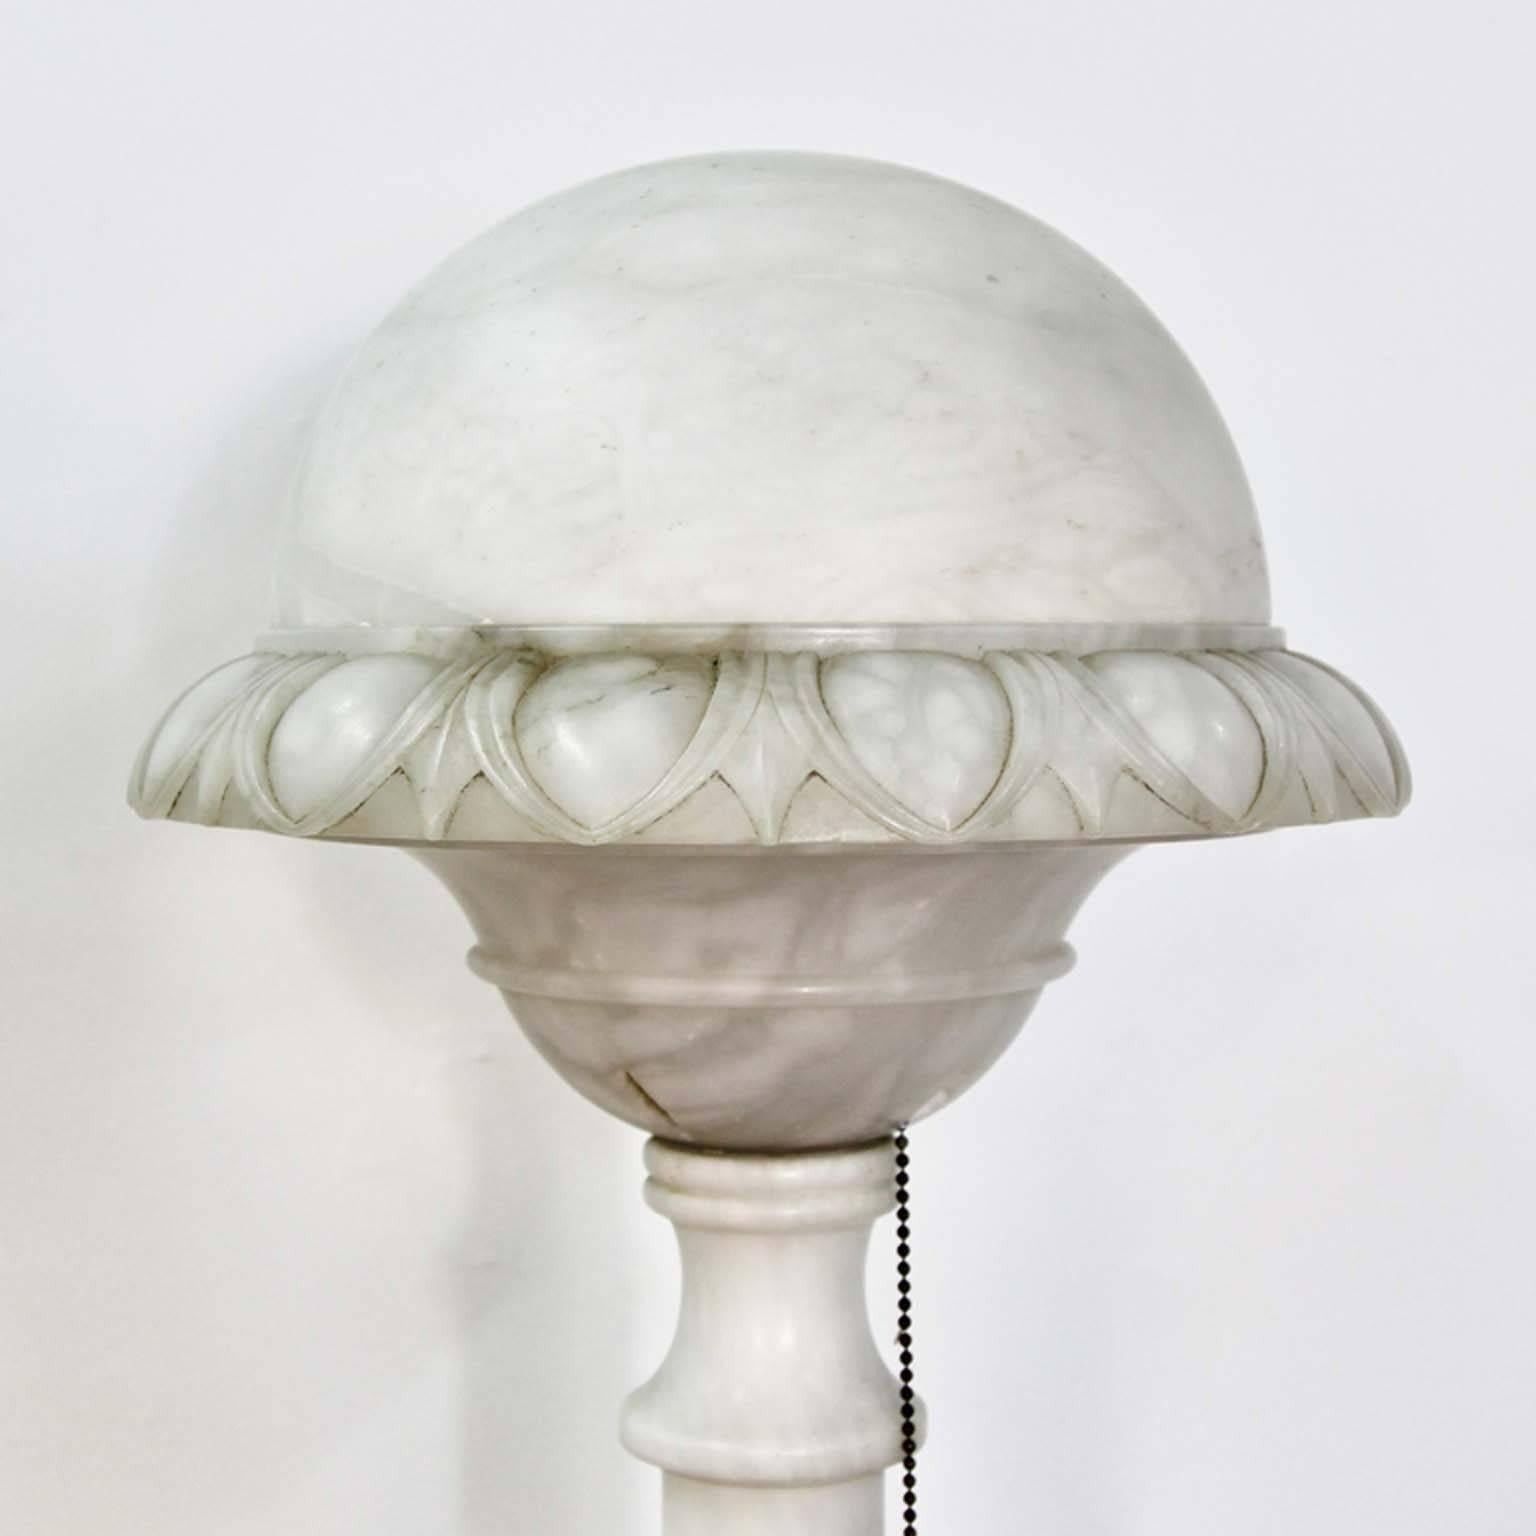 Antique Carved Alabaster Floor Lamp, Torchiere with Greek Key Motif In Good Condition For Sale In Bridport, CT